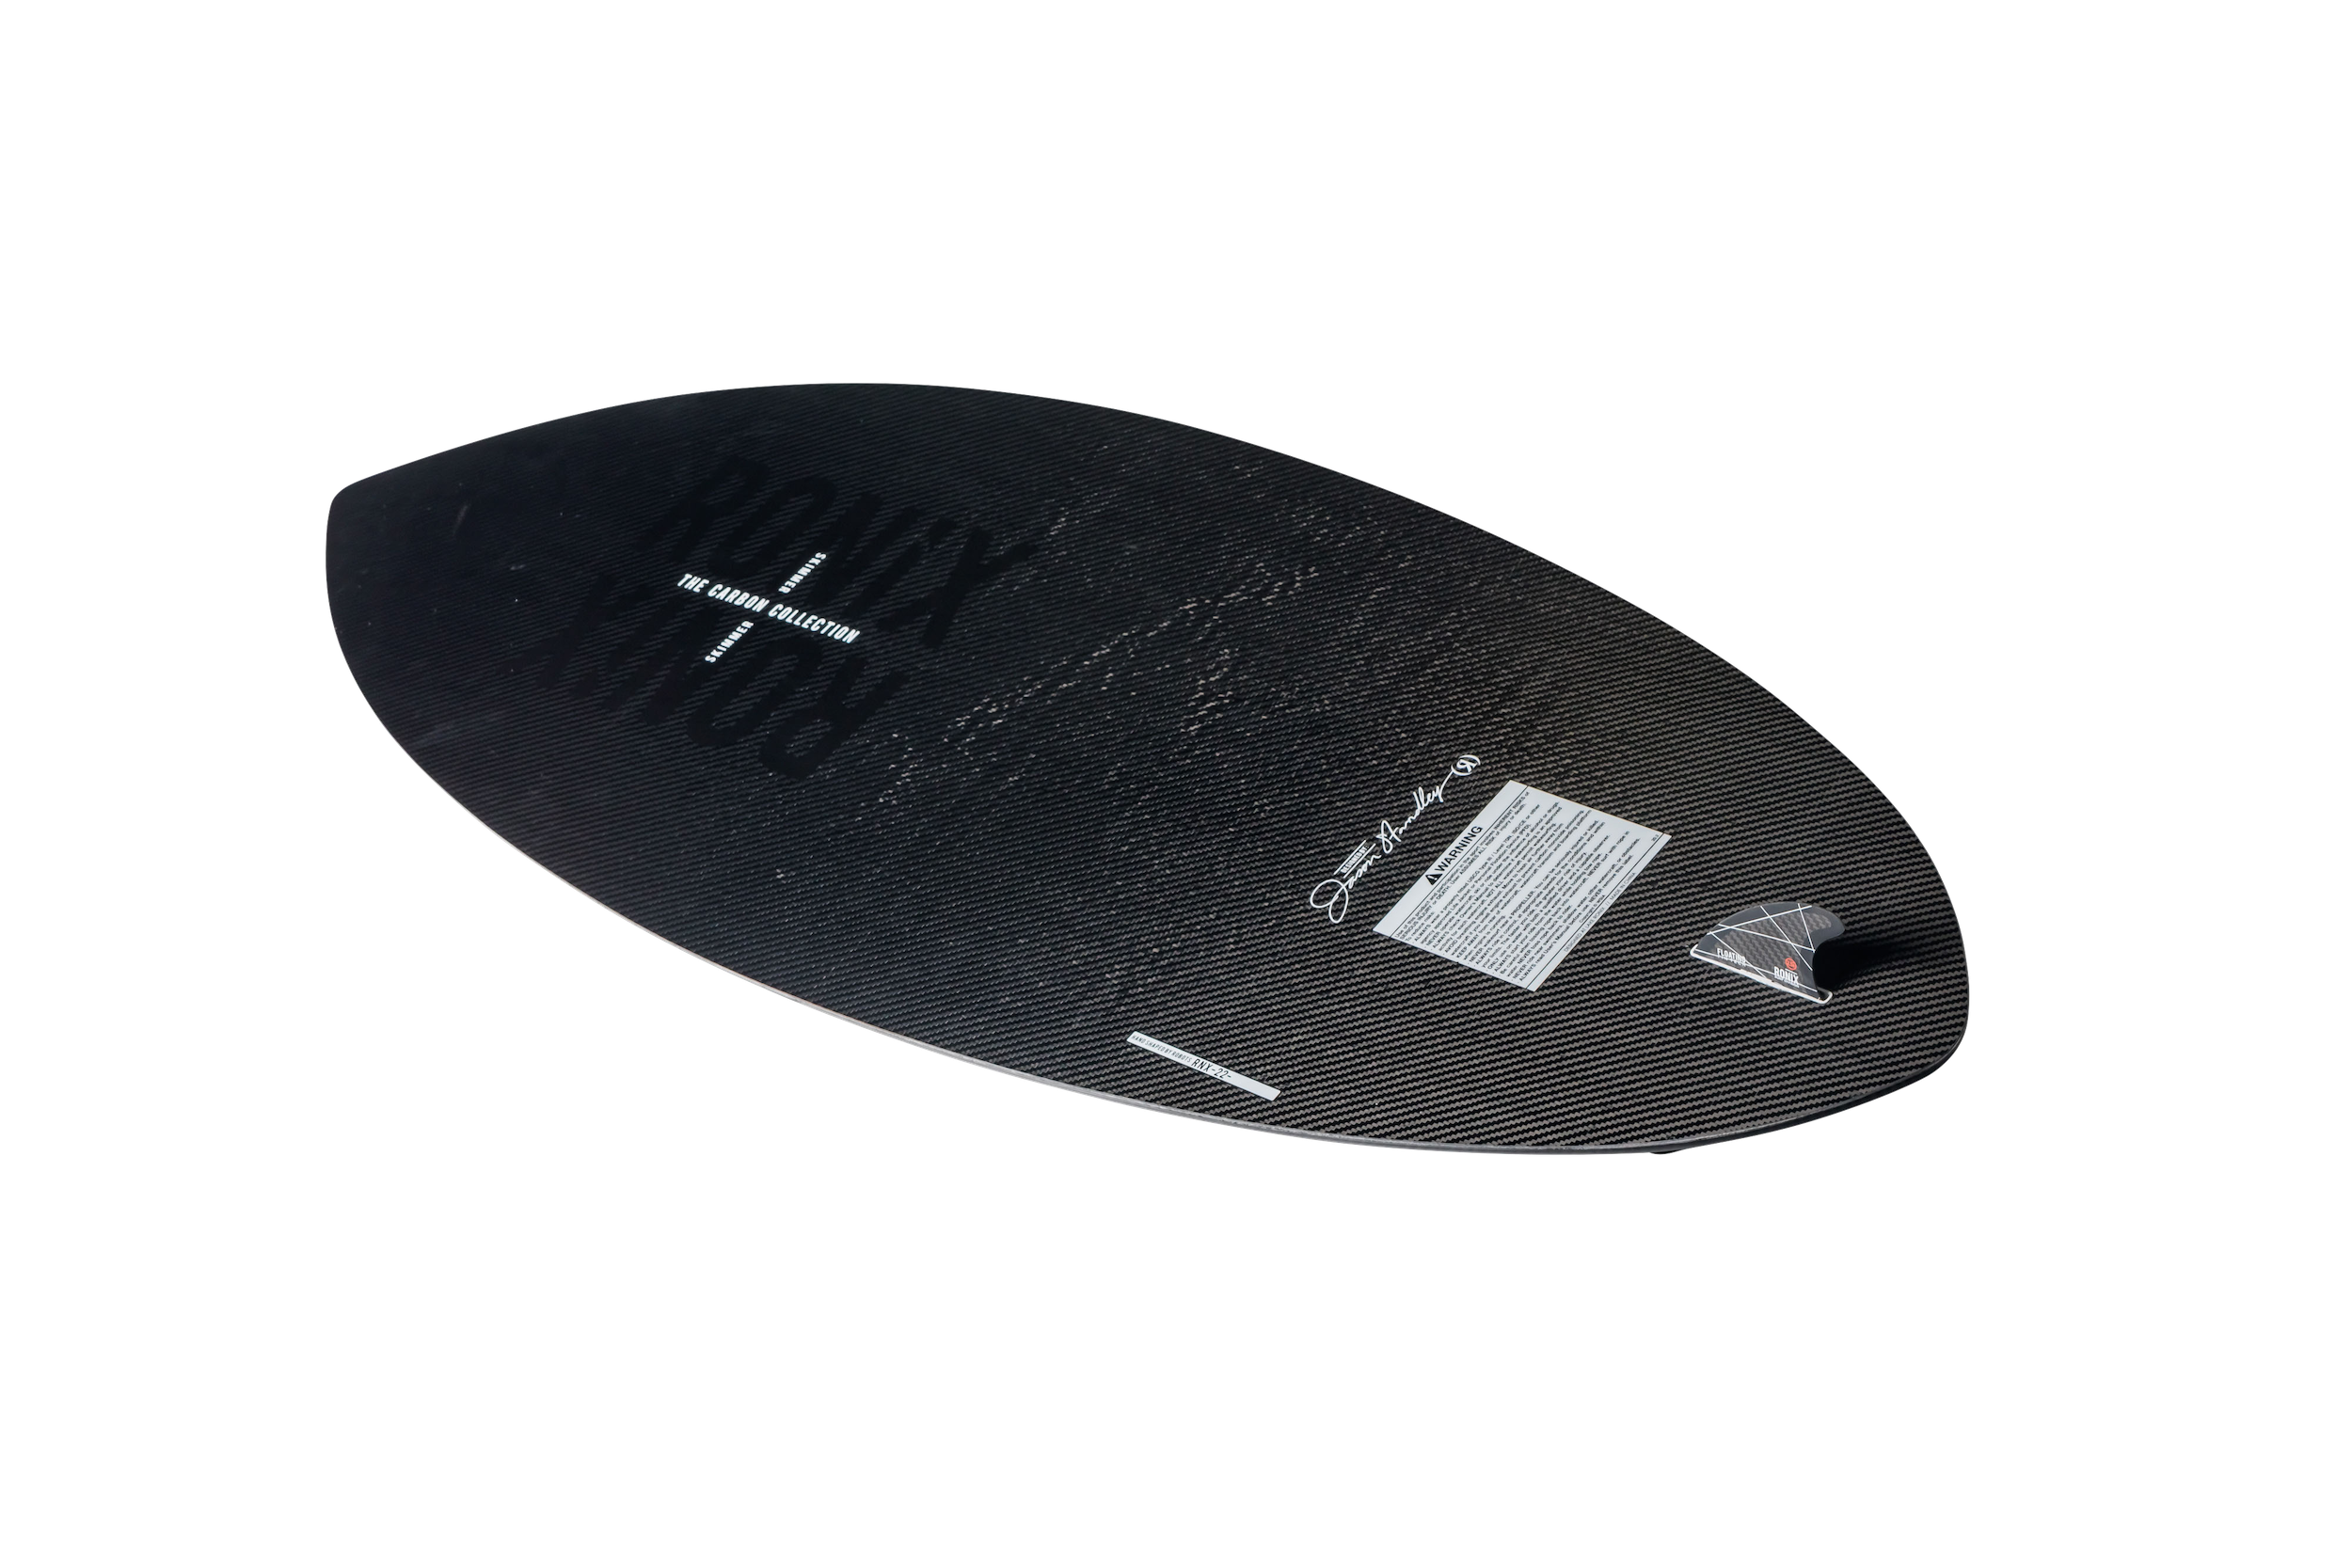 A high-end Ronix imported black surfboard on a black background.